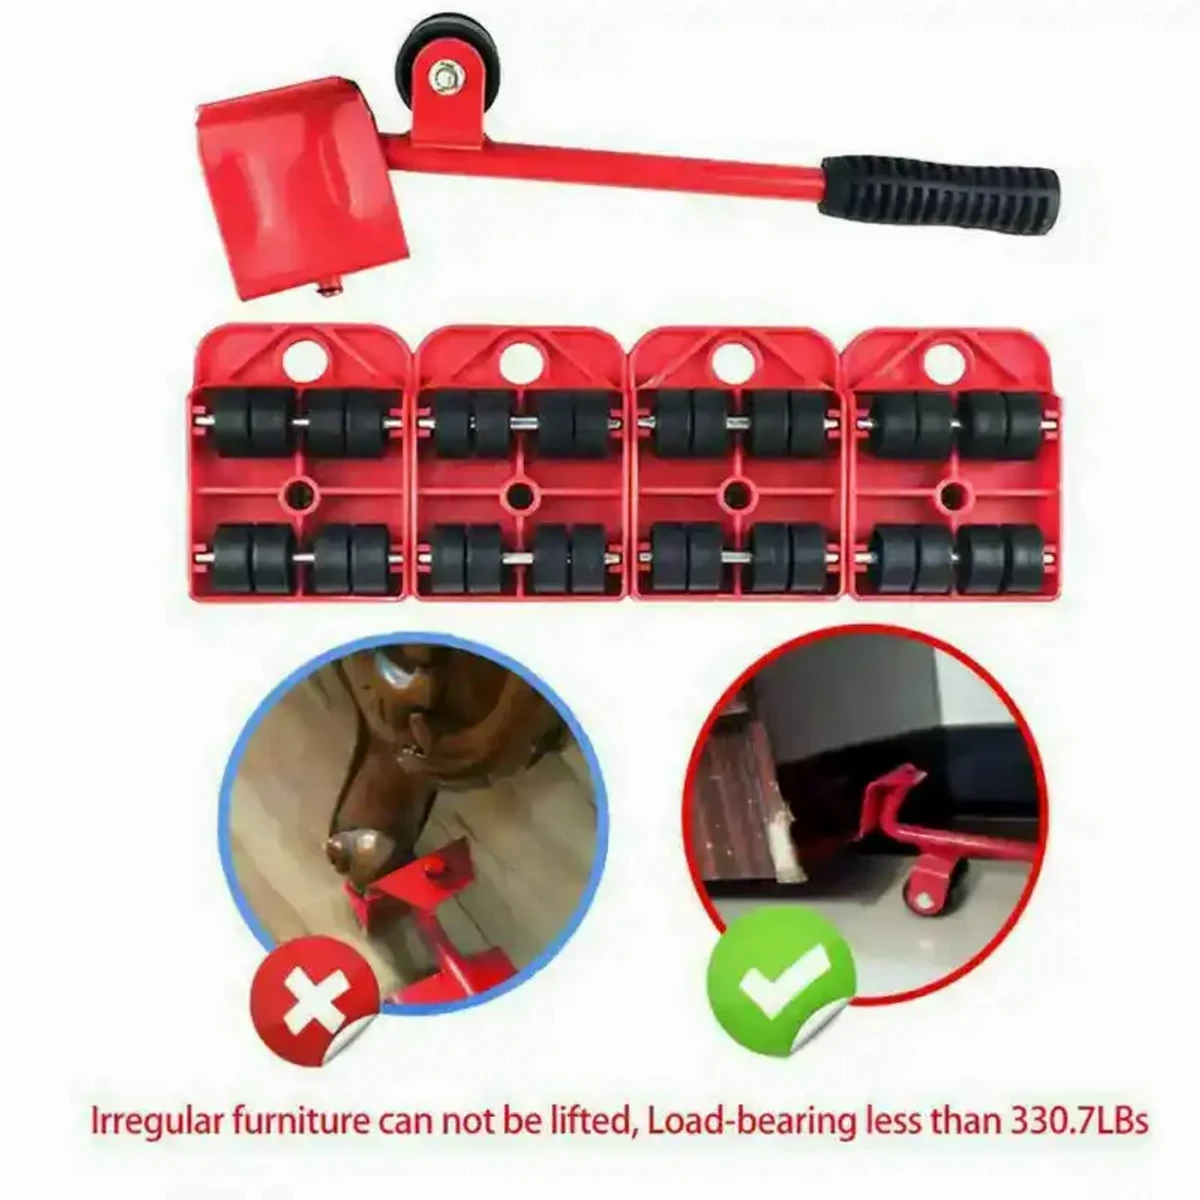 HEAVY FURNITURE MOVING LIFTER 4 MOVING SLIDERS